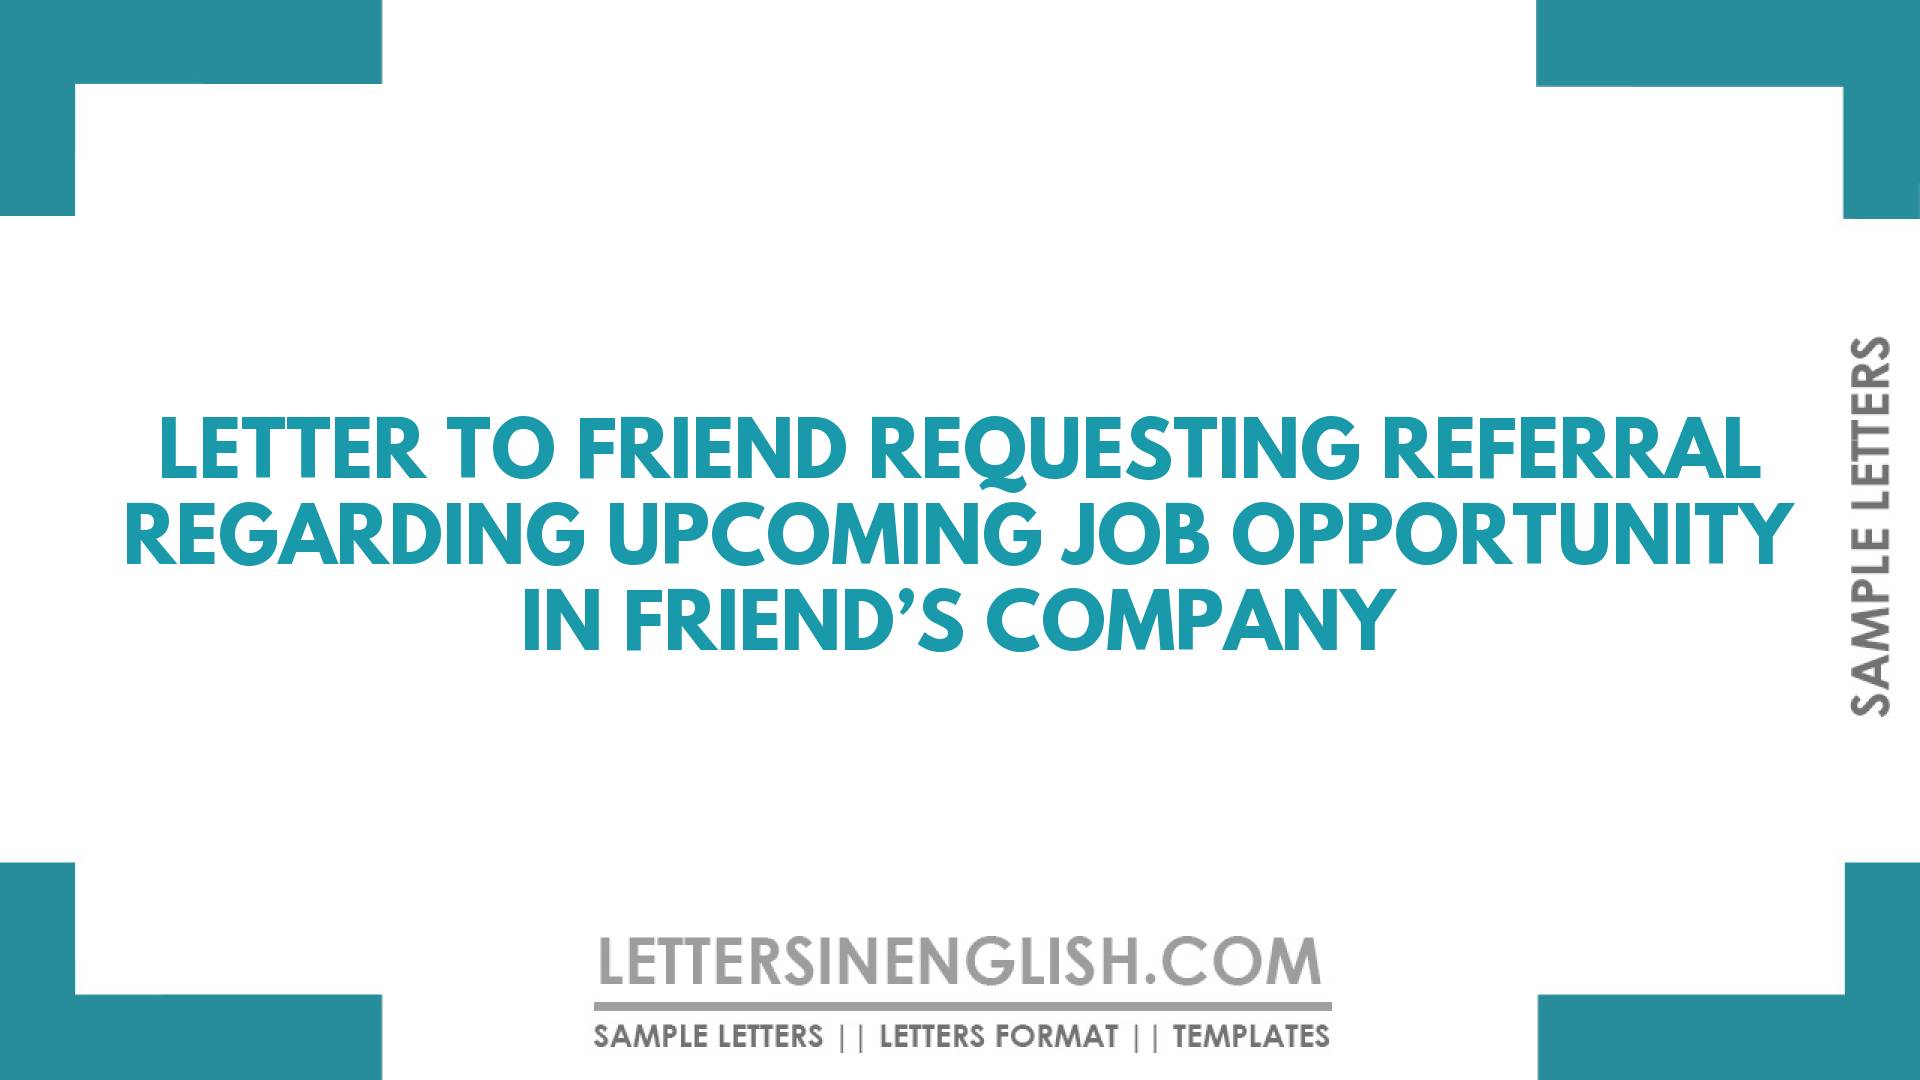 Letter To Friend Requesting Referral Regarding Upcoming Job Opportunity In Friend’s Company